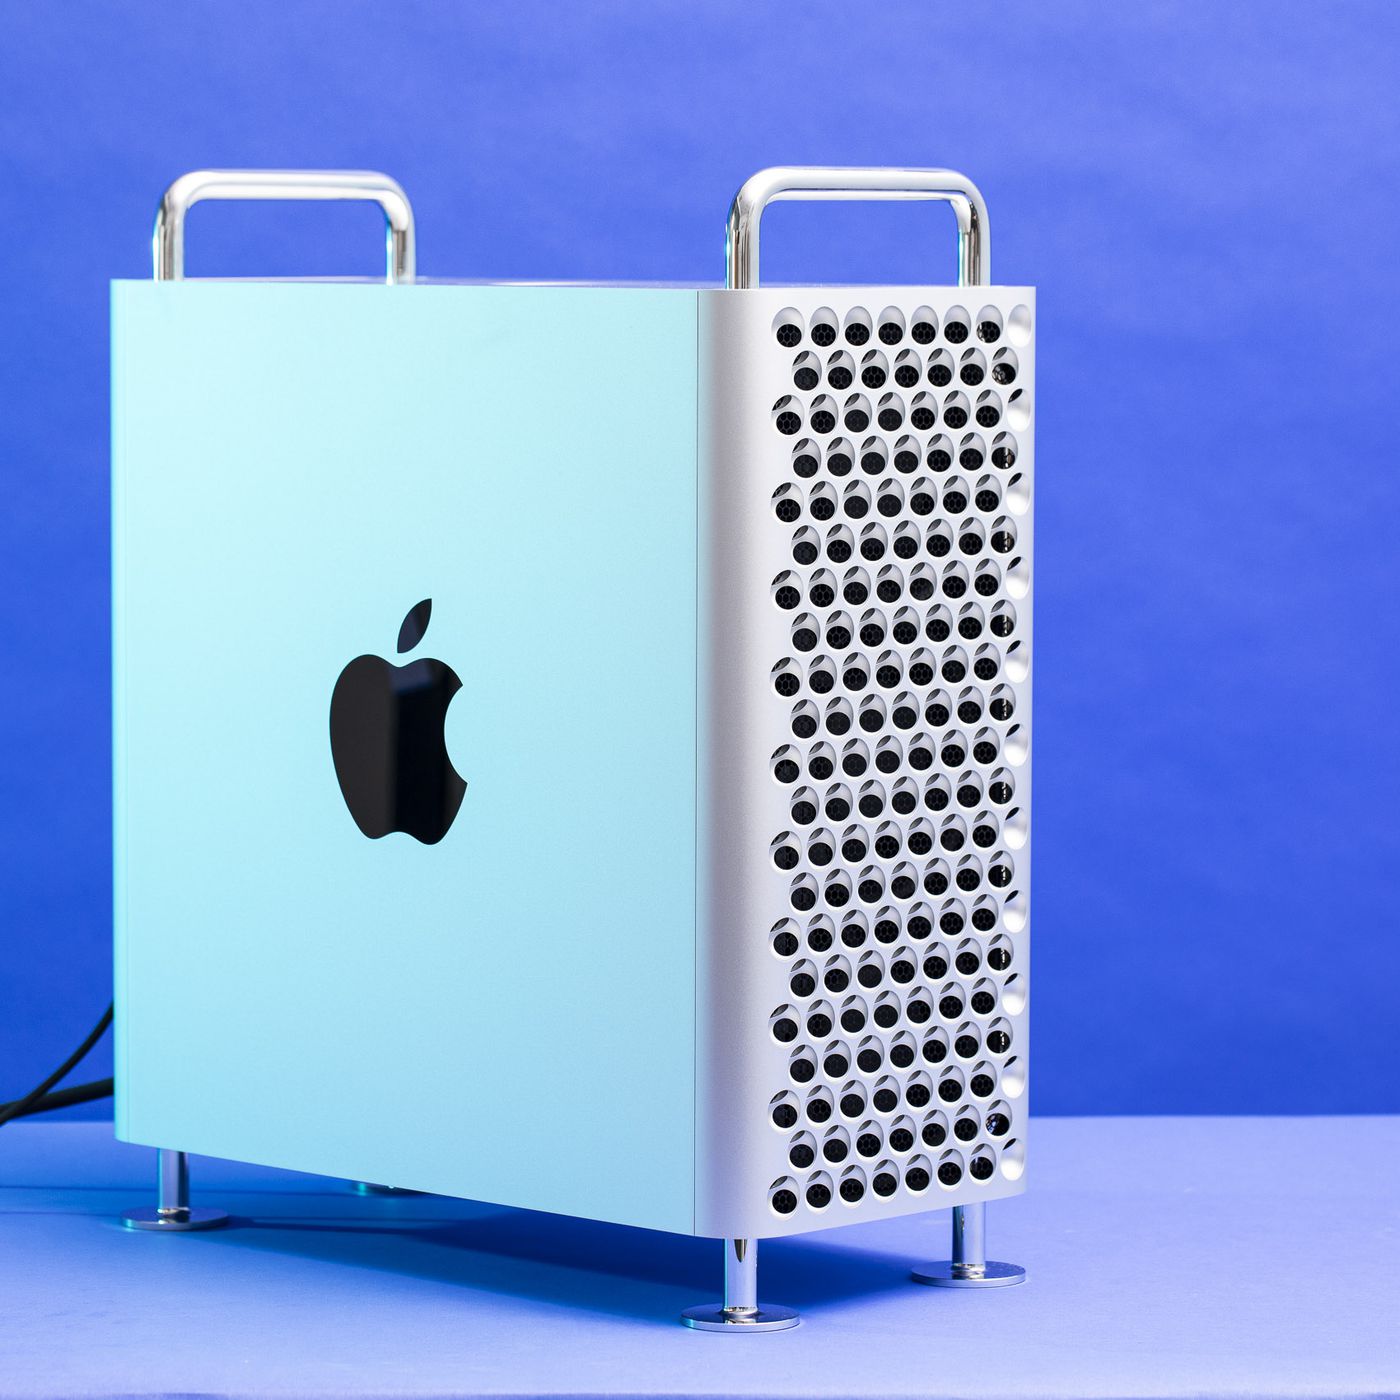 New Mac Pro With M2 Ultra: Everything You Need To Know